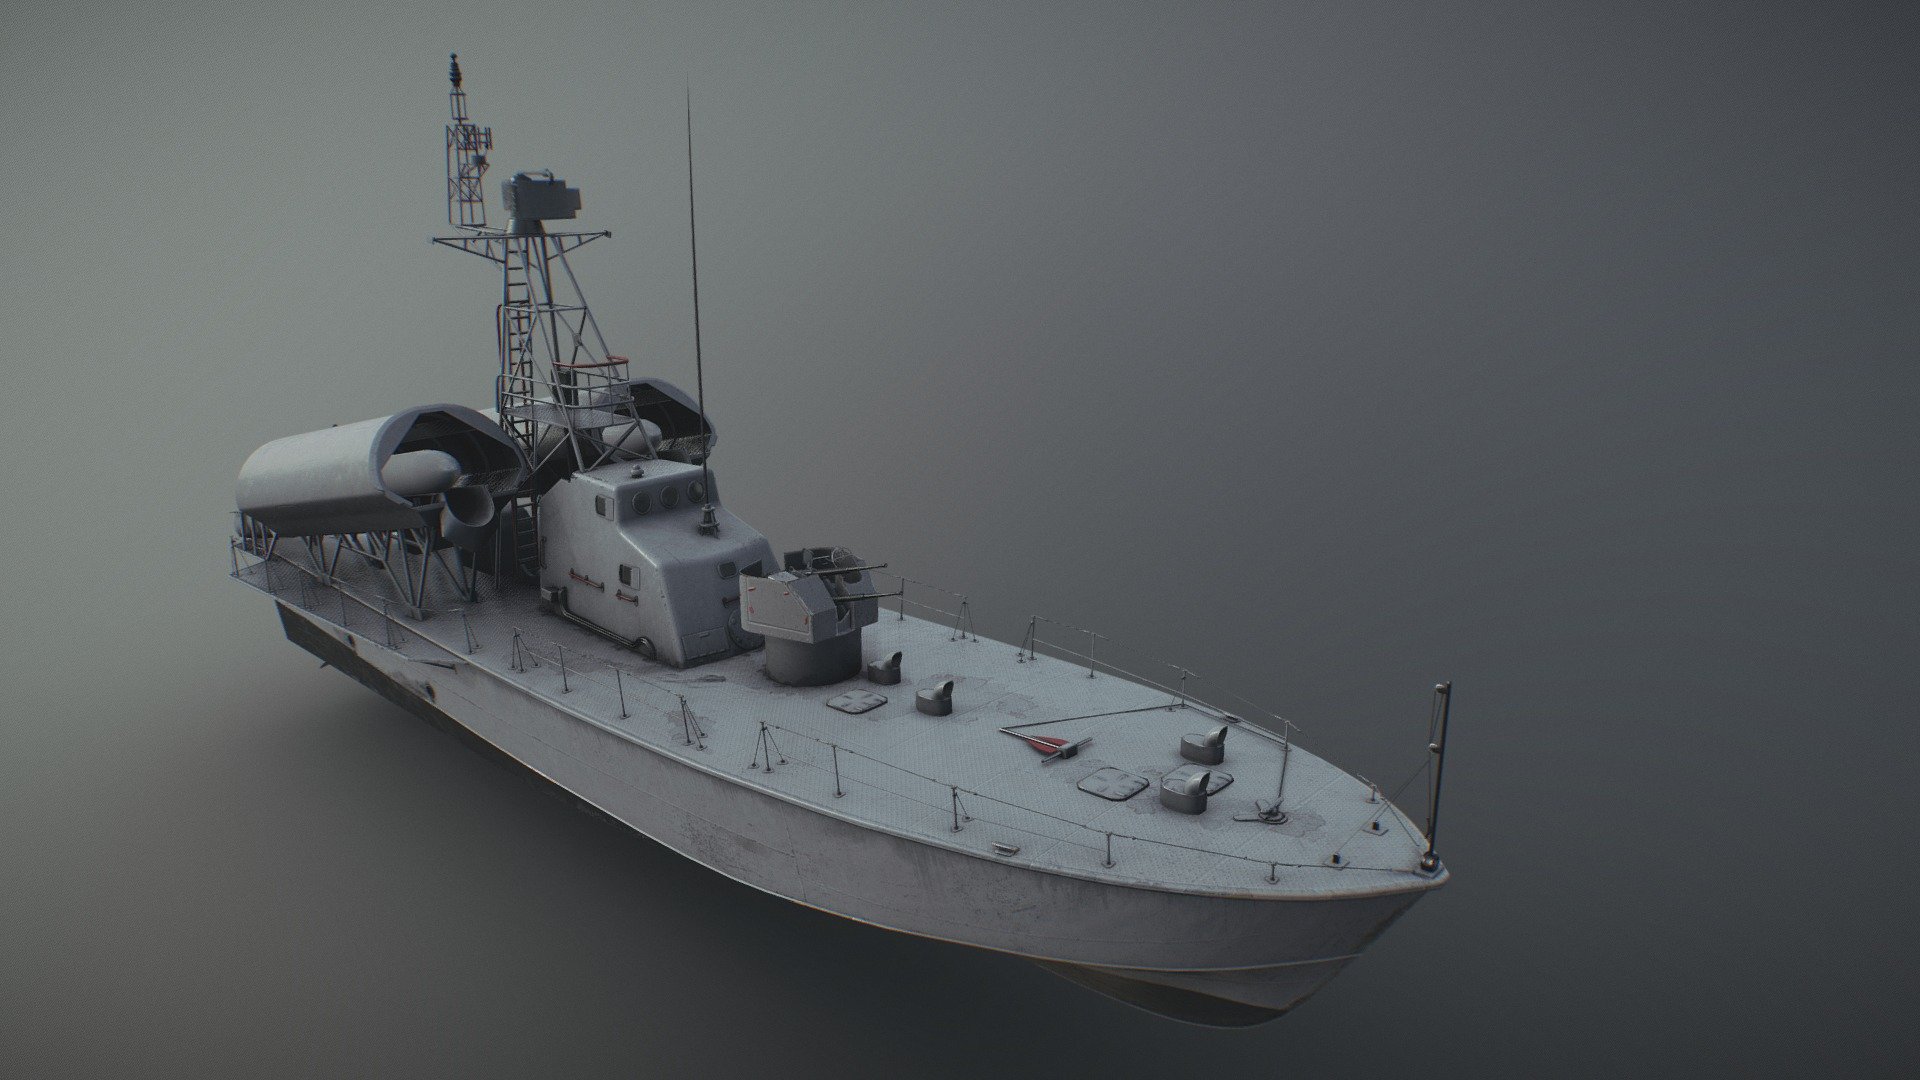 Gamedev redy model of the project 183-R missile boat, textured metal/rough pipeline 3d model